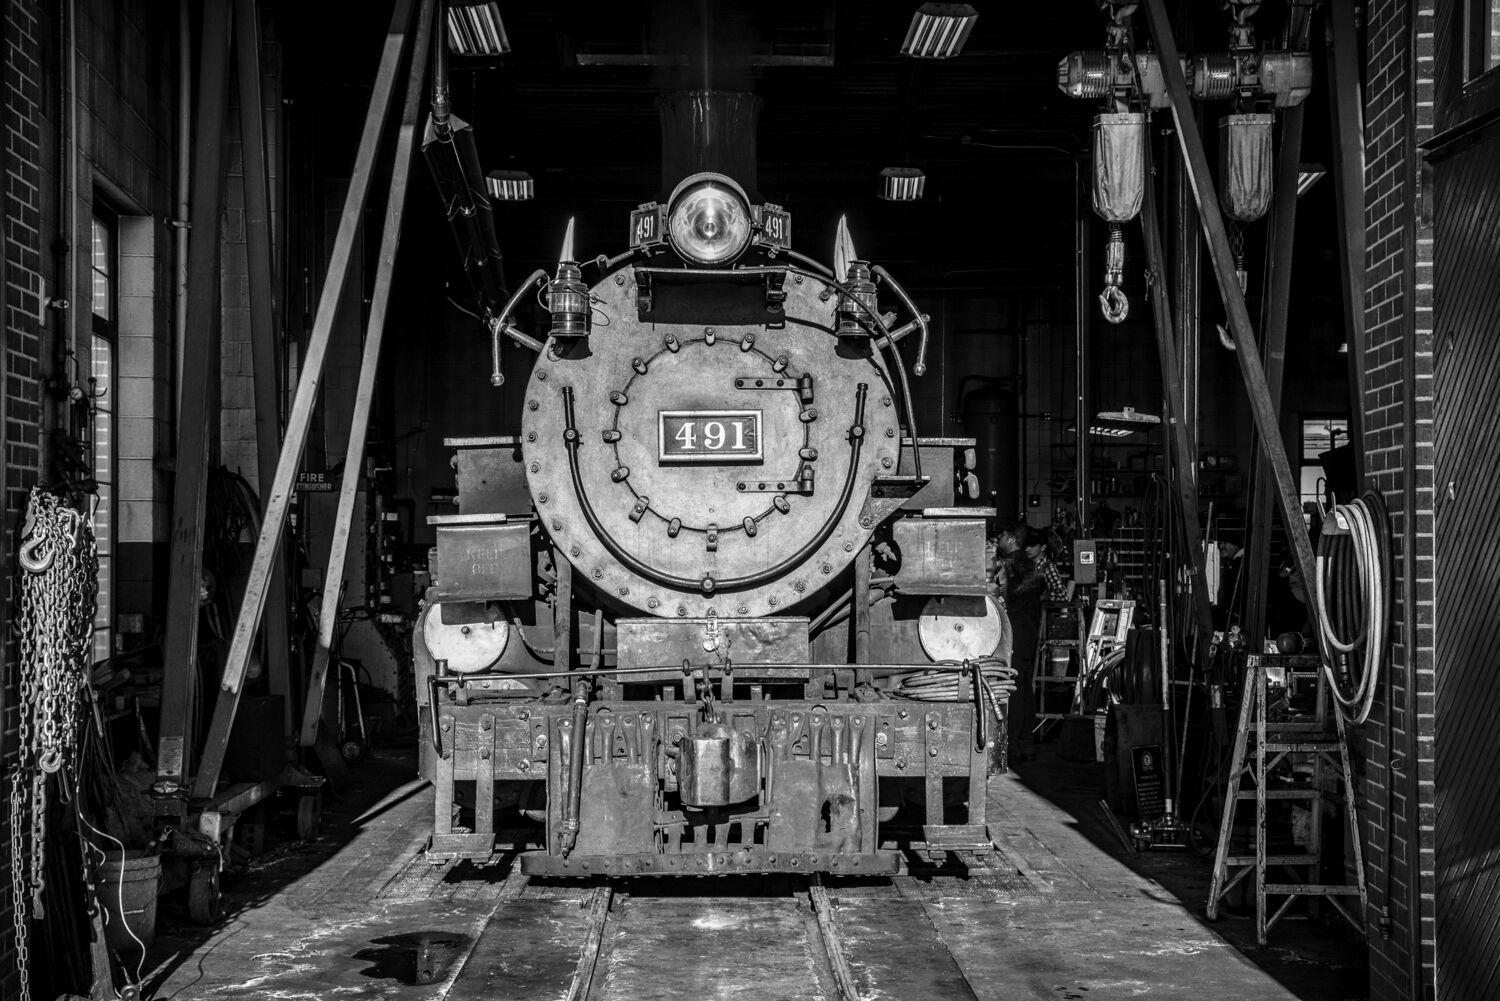 DRGW K-37 poses in stall 1 at the roundhouse at the Colorado Railroad Museum in Golden Colorado. 491 will soom be pulling a passenger...